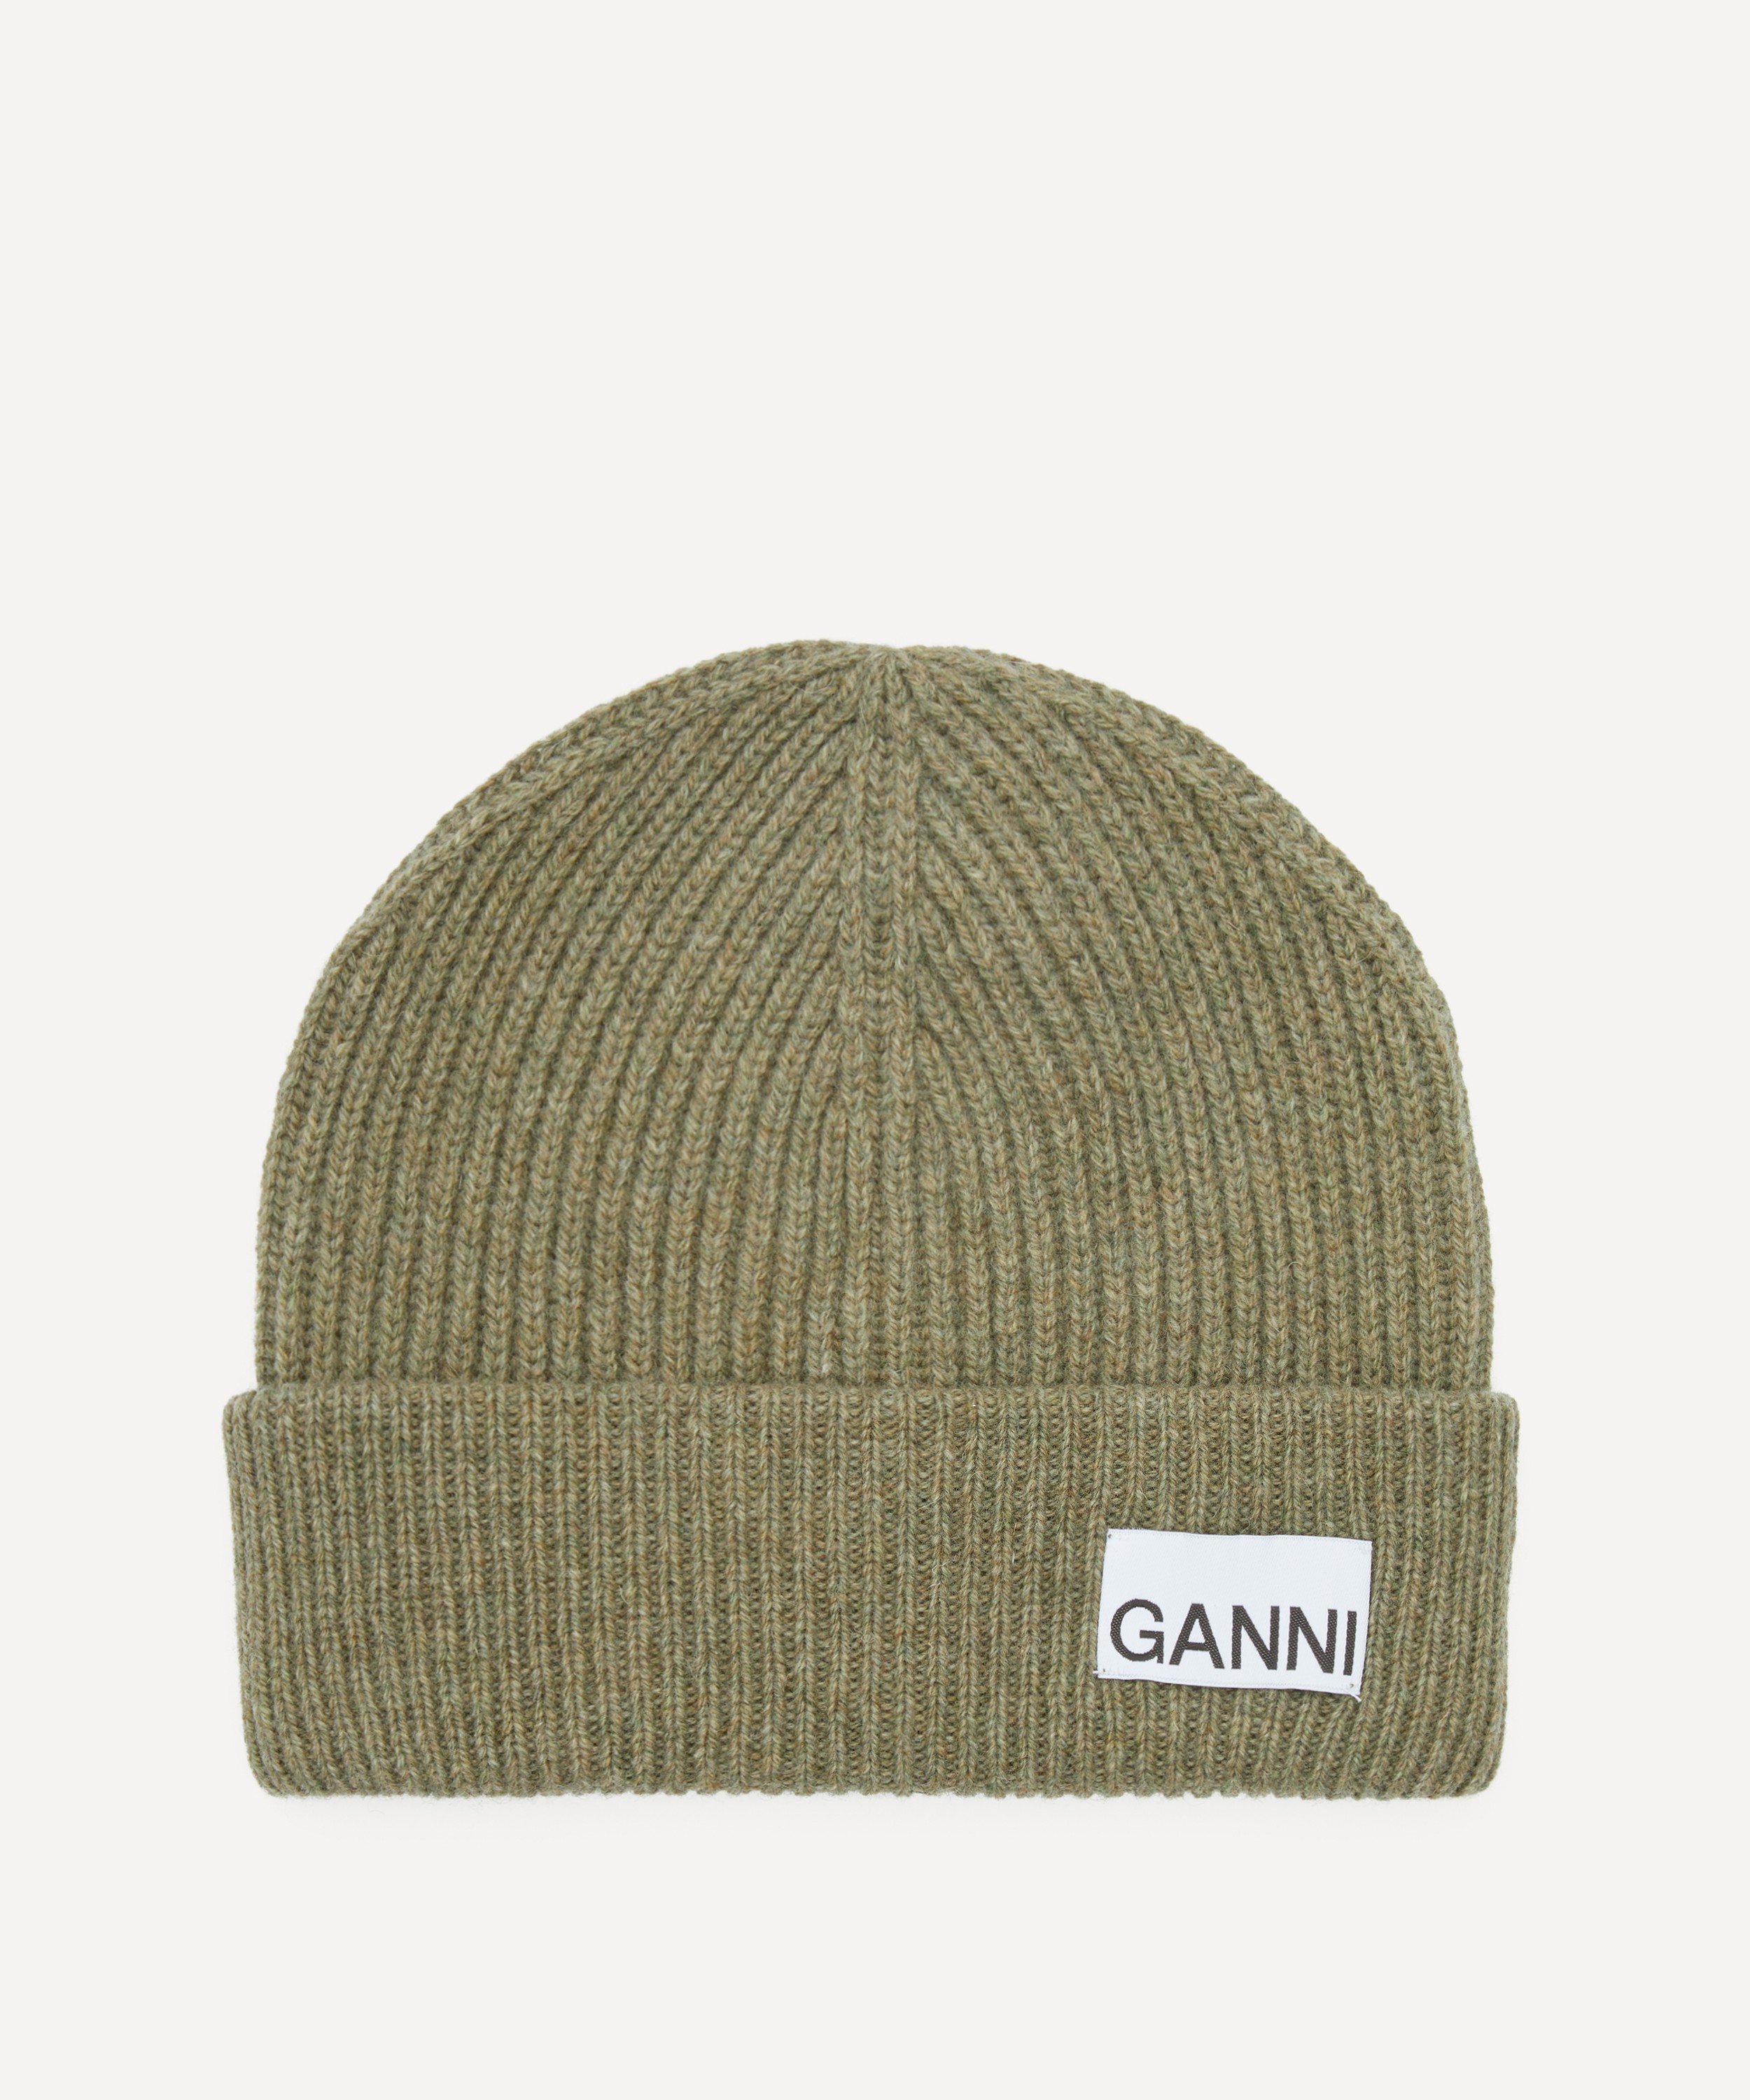 Ganni - Ribbed Knit Beanie image number 0